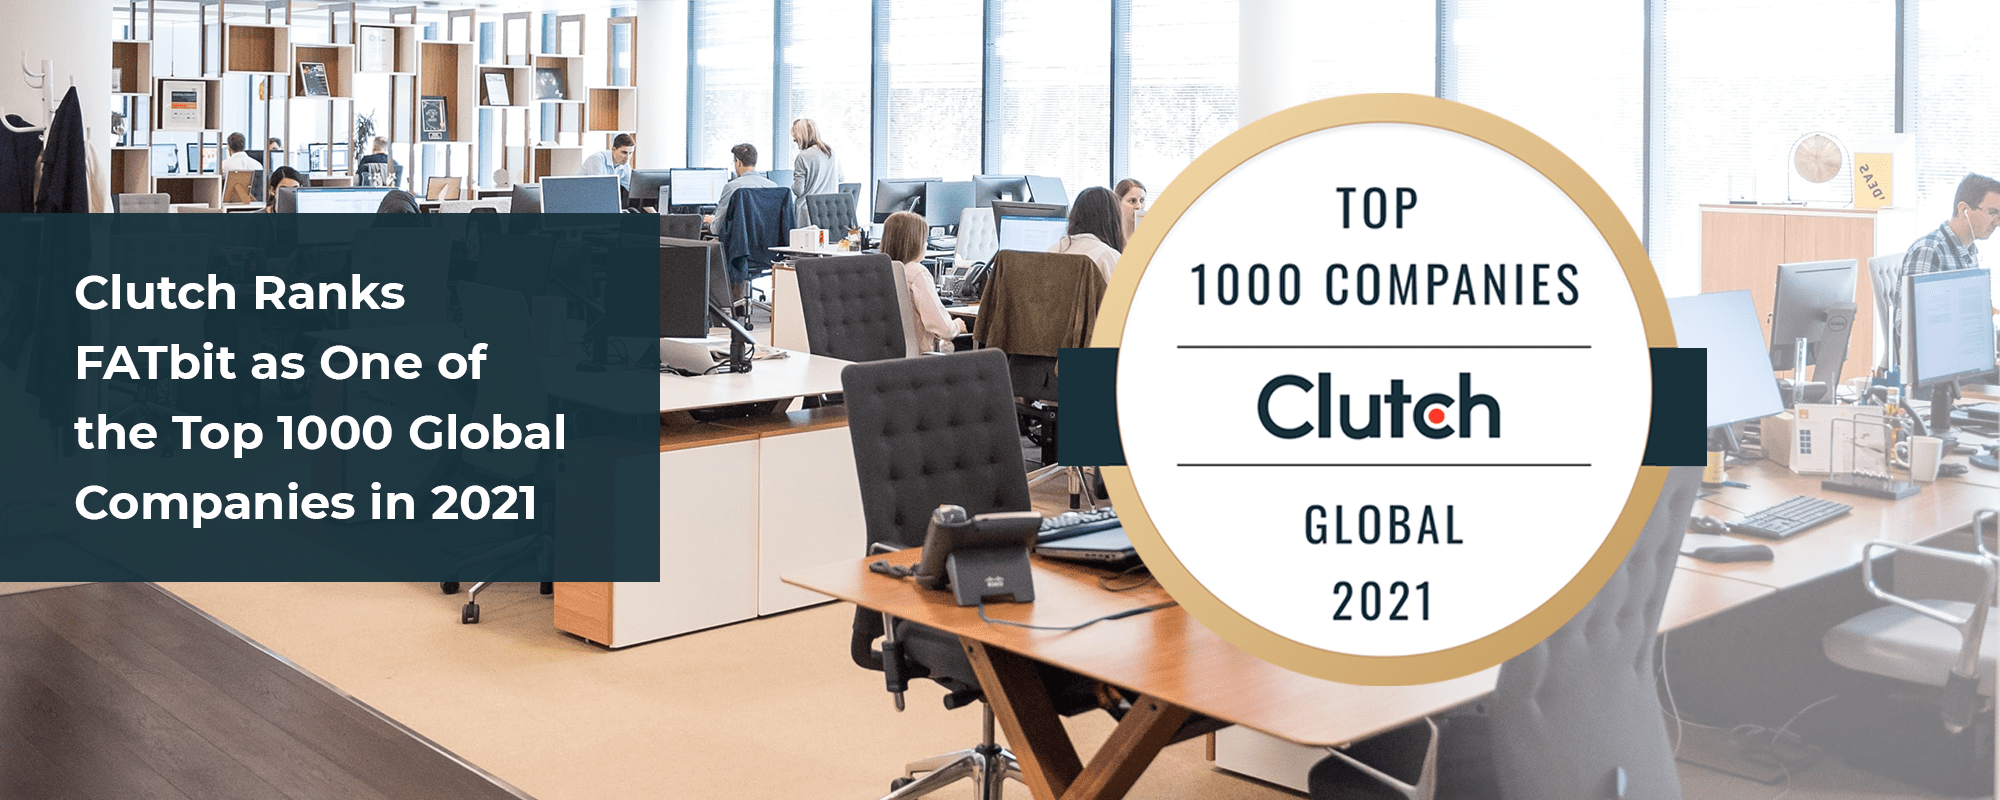 FATbit Technologies Gets Recognised in Clutch’s Top 1000 Global Companies List for 2021